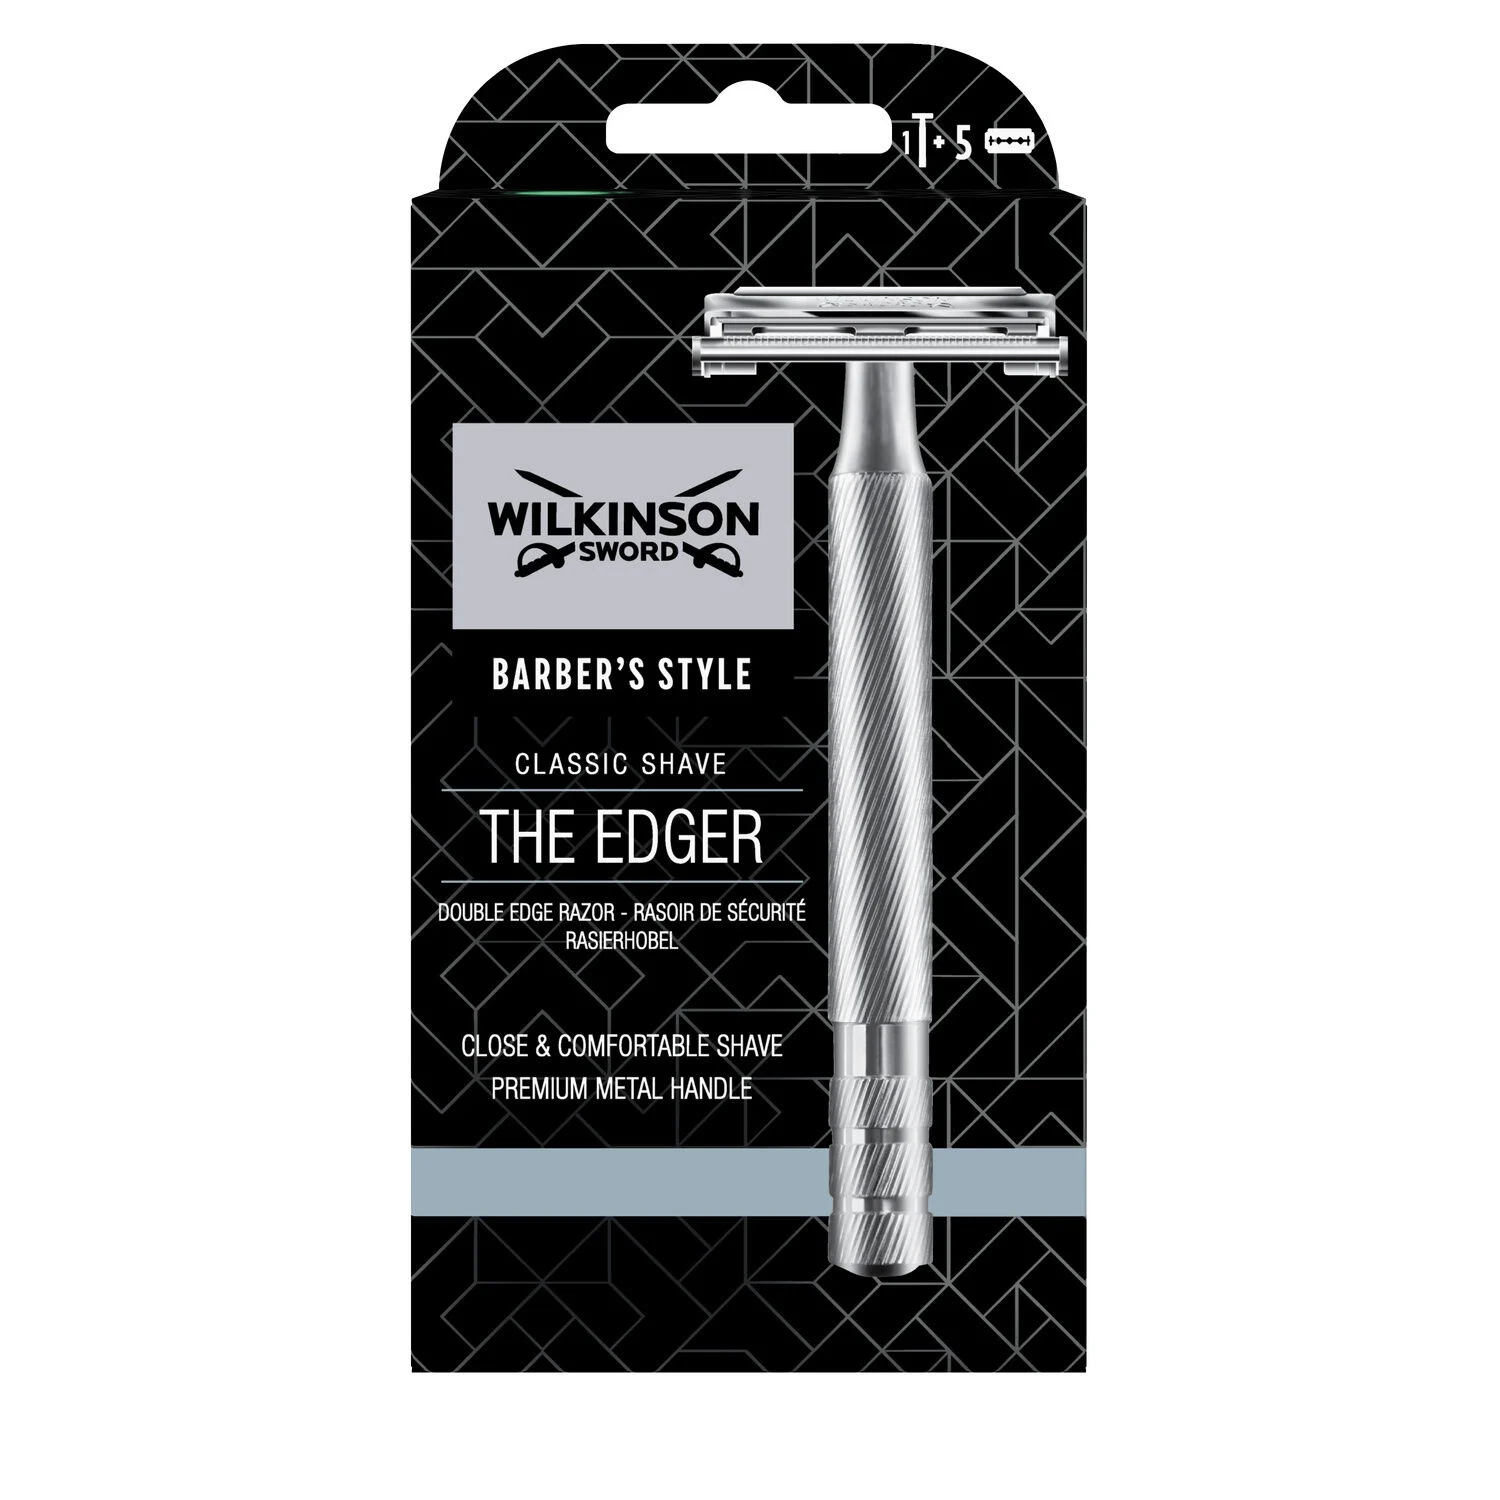 Rasoirhomme The Edger Classic Shave Barber's Style - Wilkinson